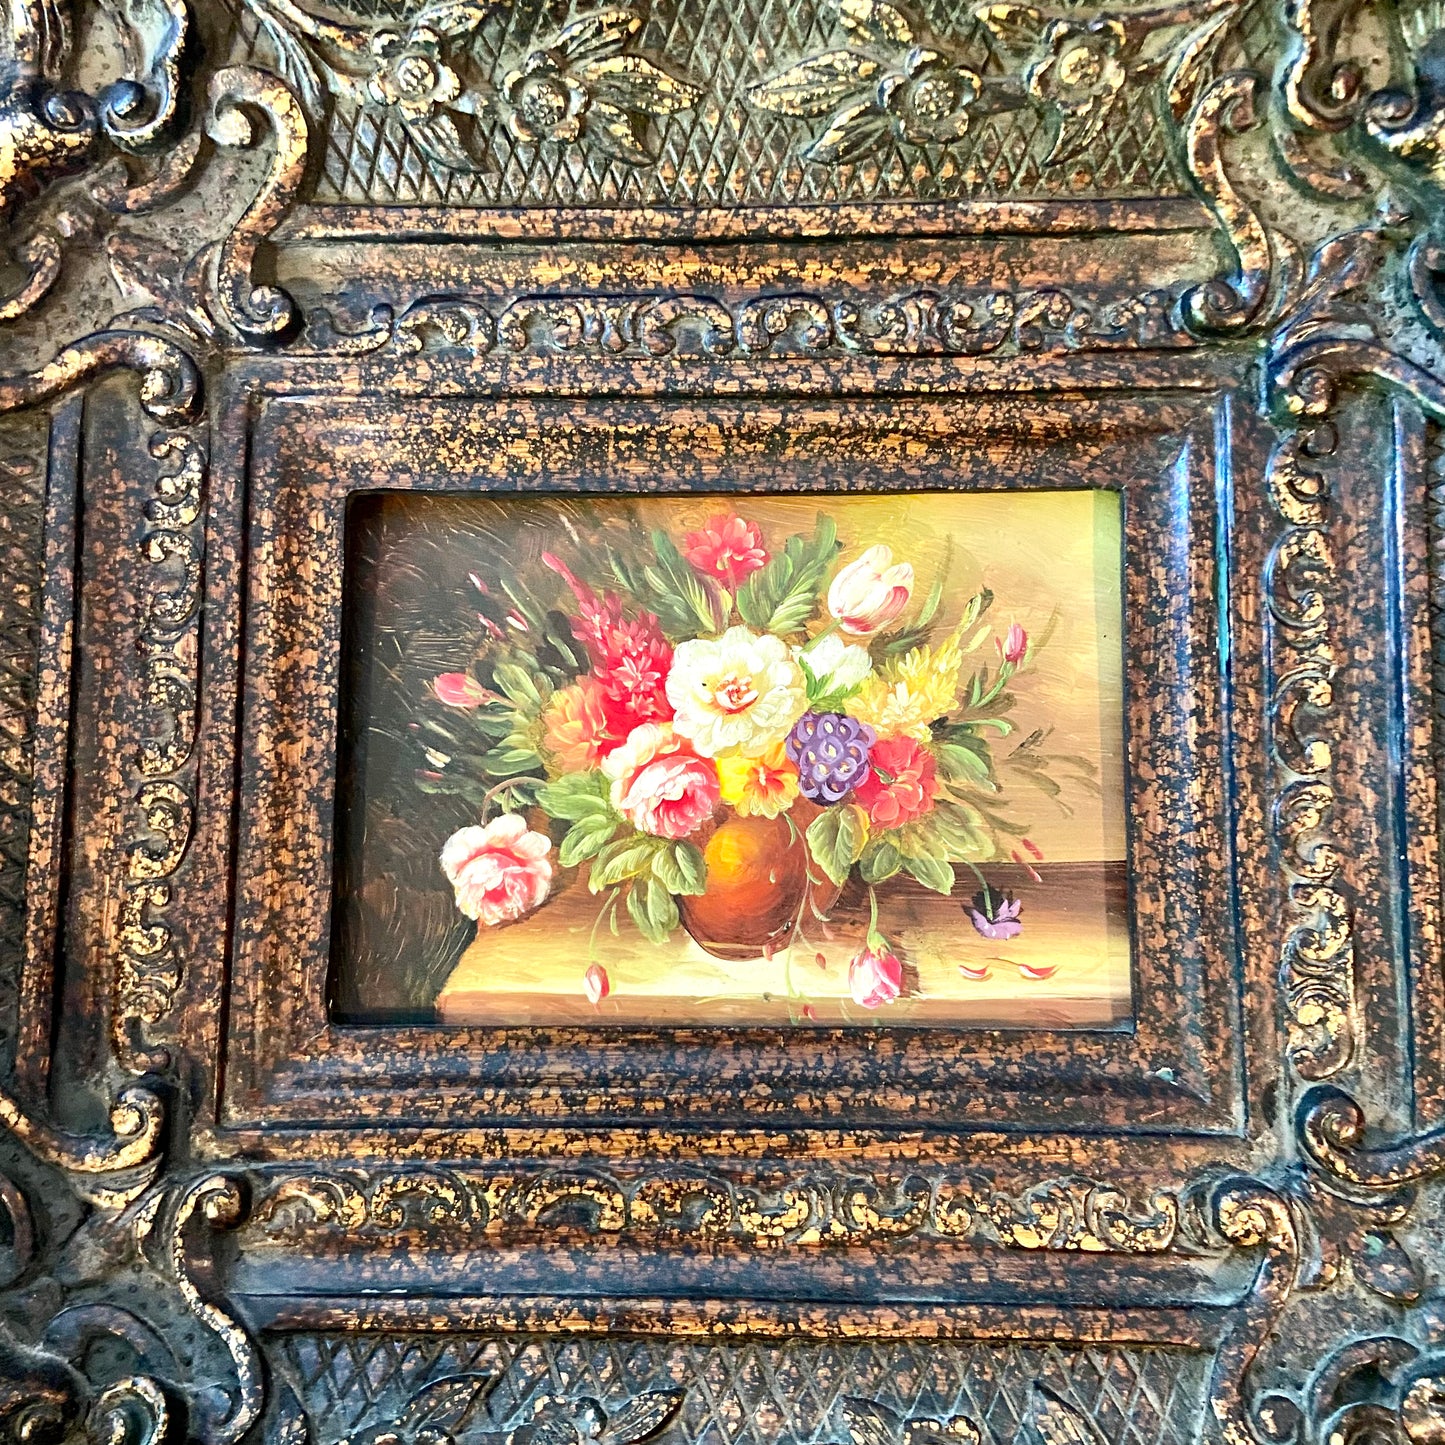 Stunning vintage botanical still life painting on wood in baroque frame wall art